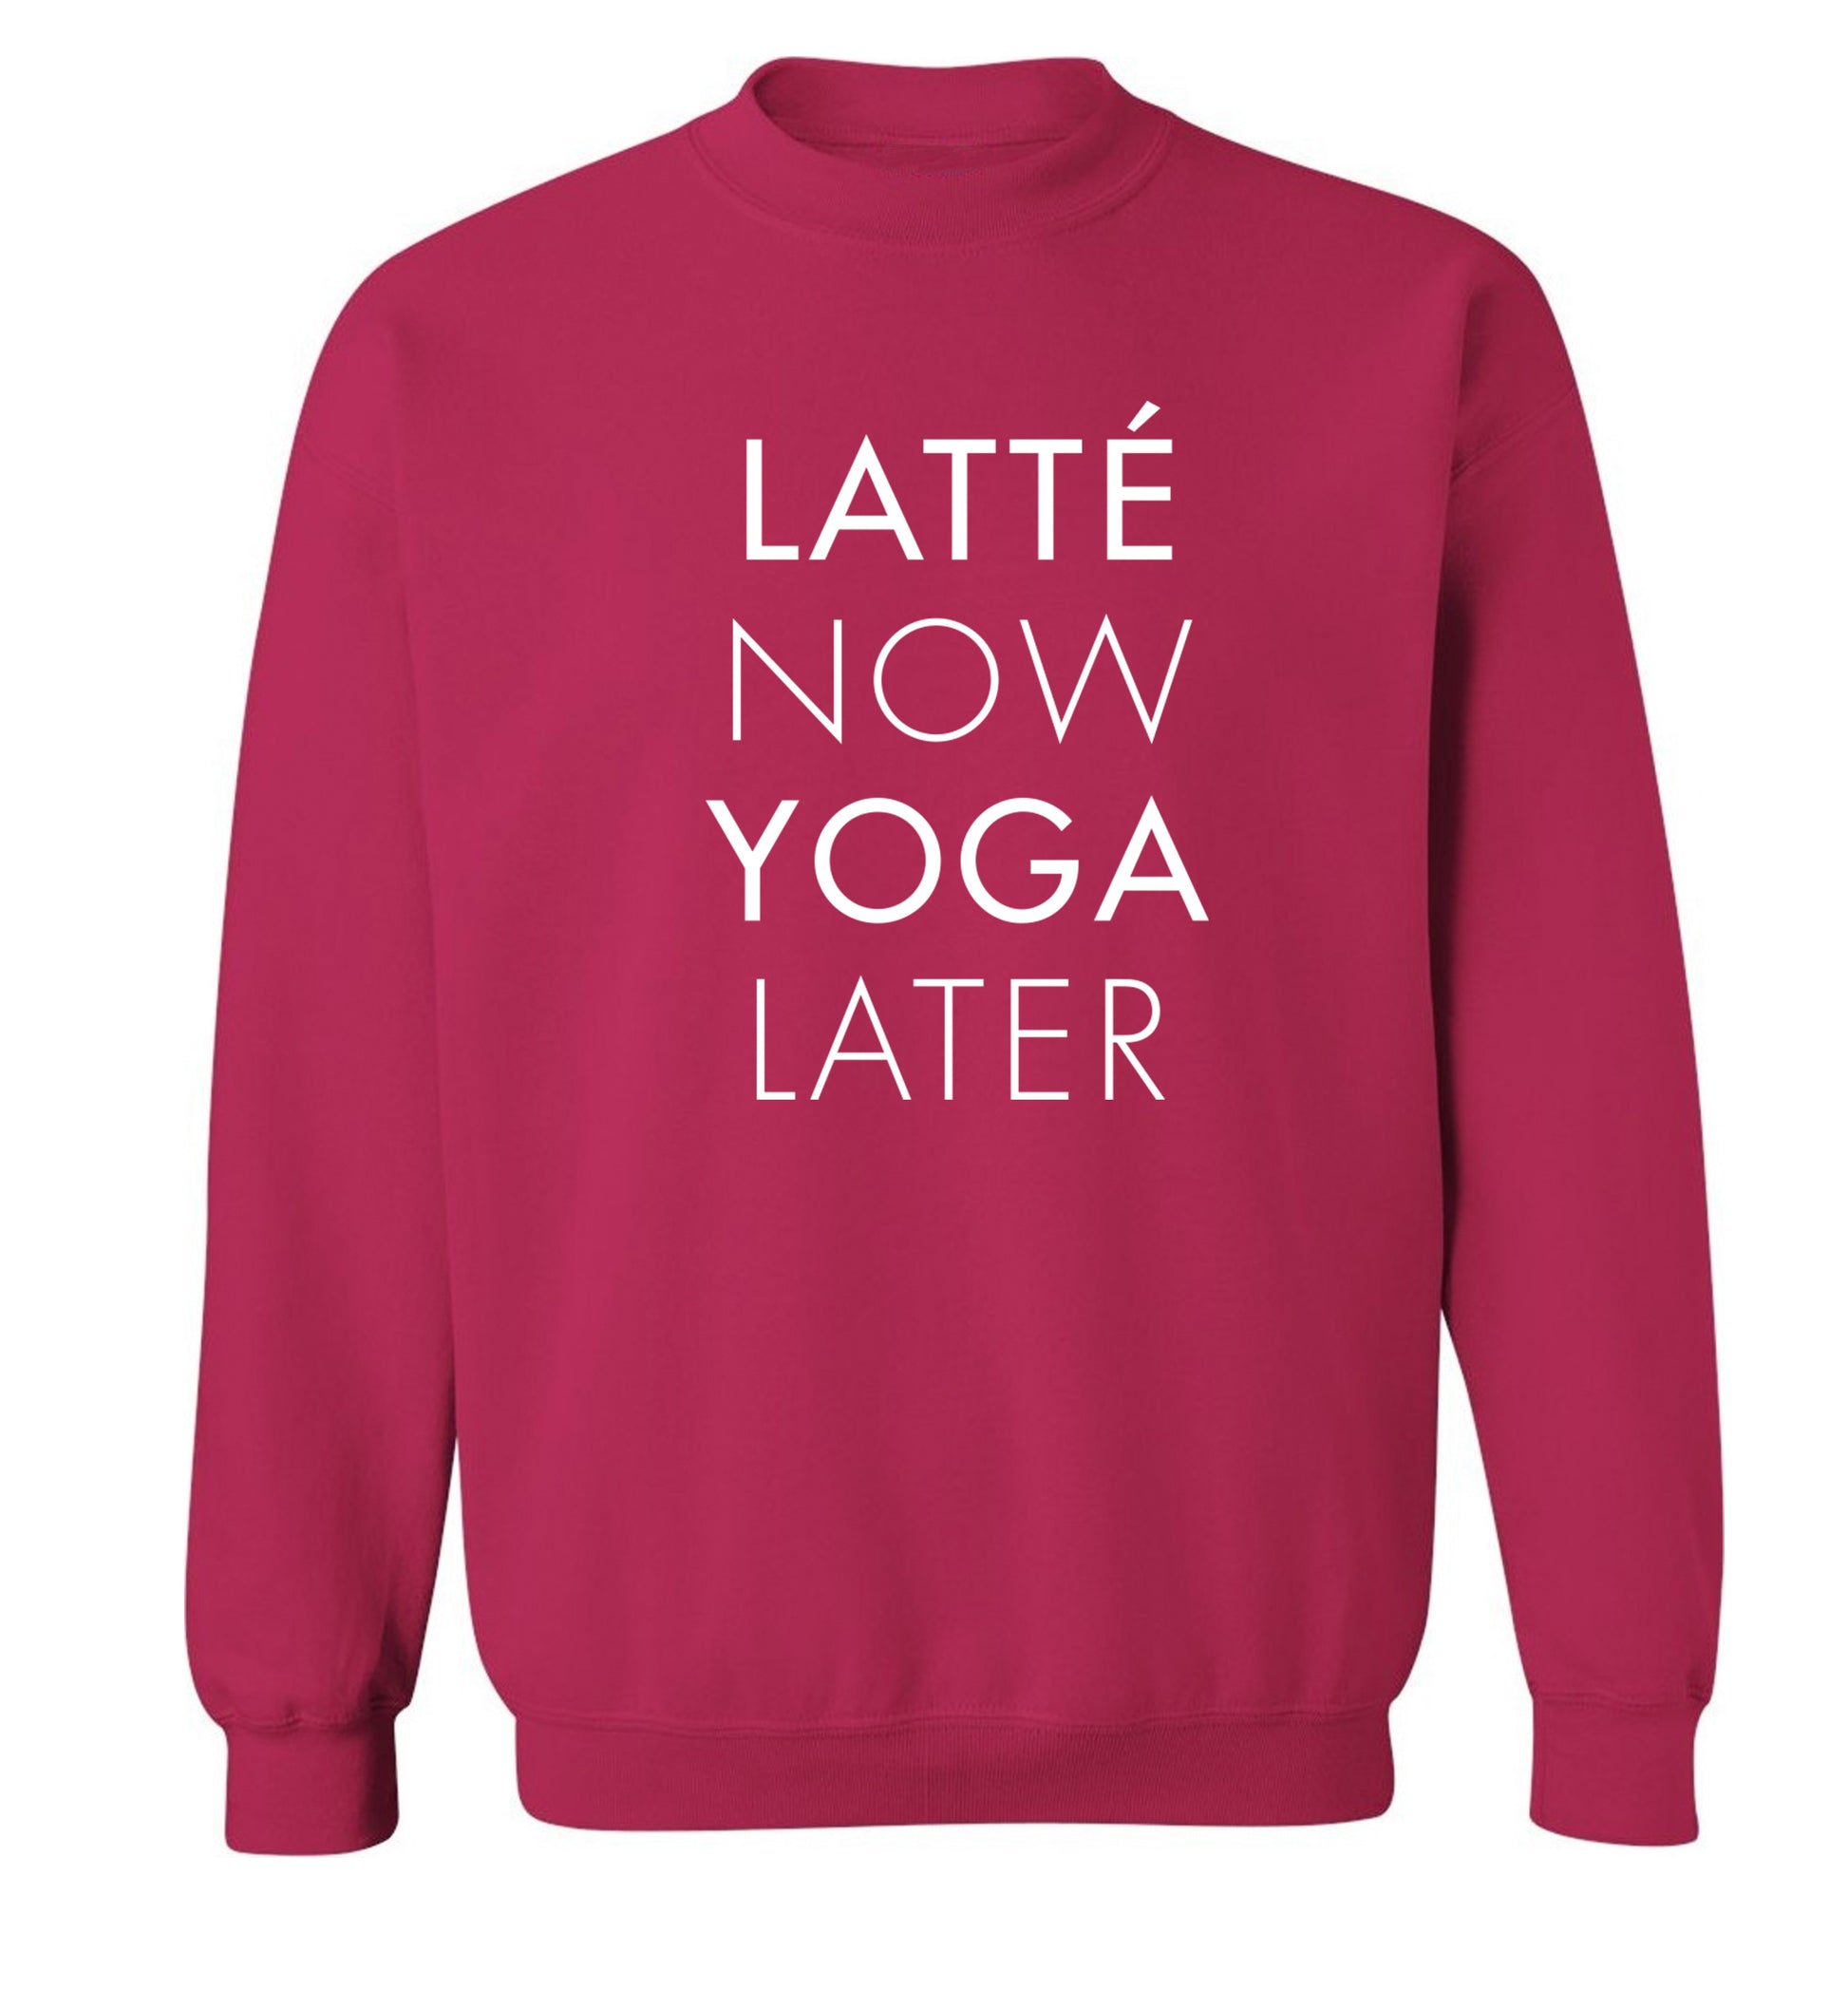 Latte now yoga later Adult's unisex pink Sweater 2XL